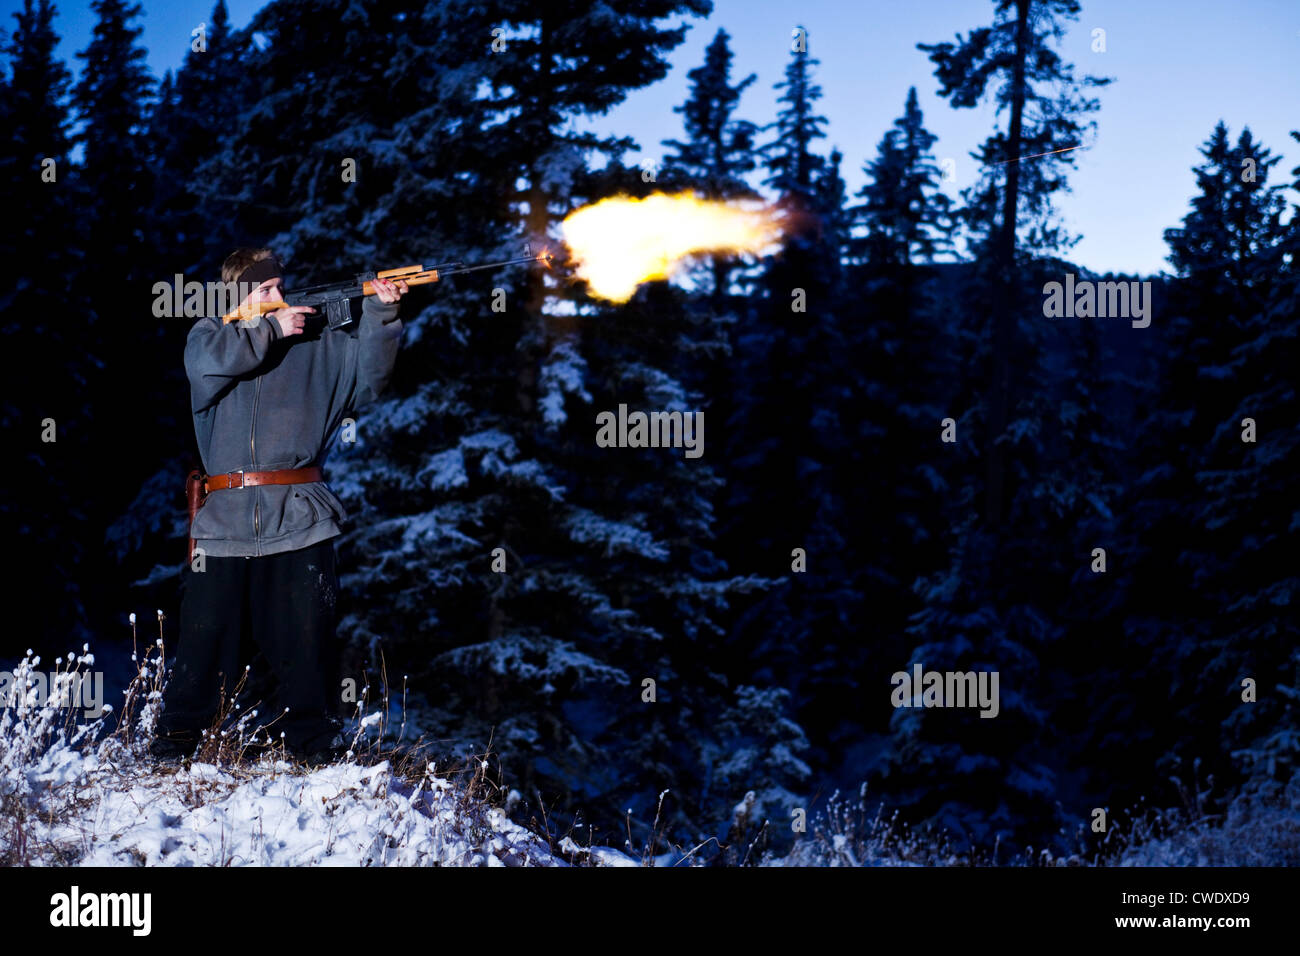 A young man shooting a large gun with a flame coming out of the barrel in Montana. Stock Photo